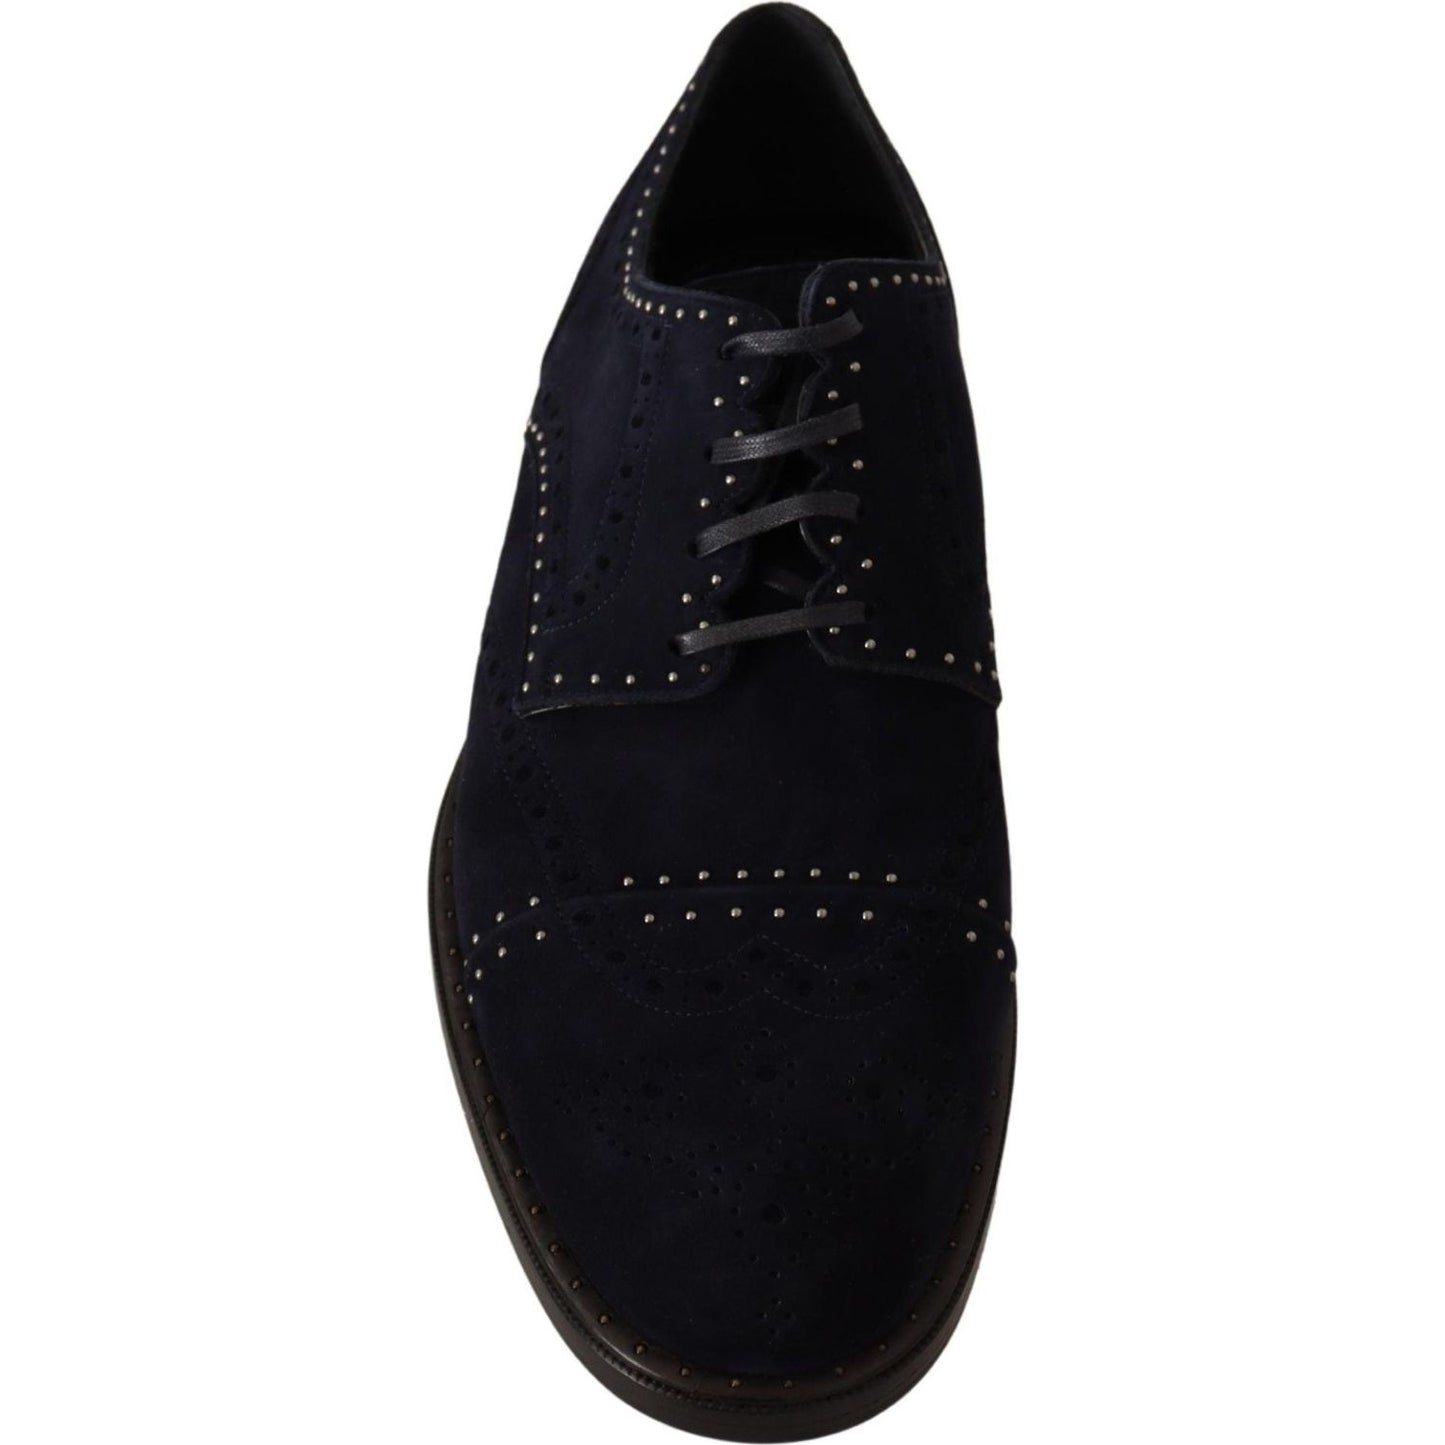 Dolce & Gabbana Elegant Suede Derby Shoes with Silver Studs blue-suede-leather-derby-studded-shoes Dress Shoes IMG_8958-de2396b3-e55.jpg